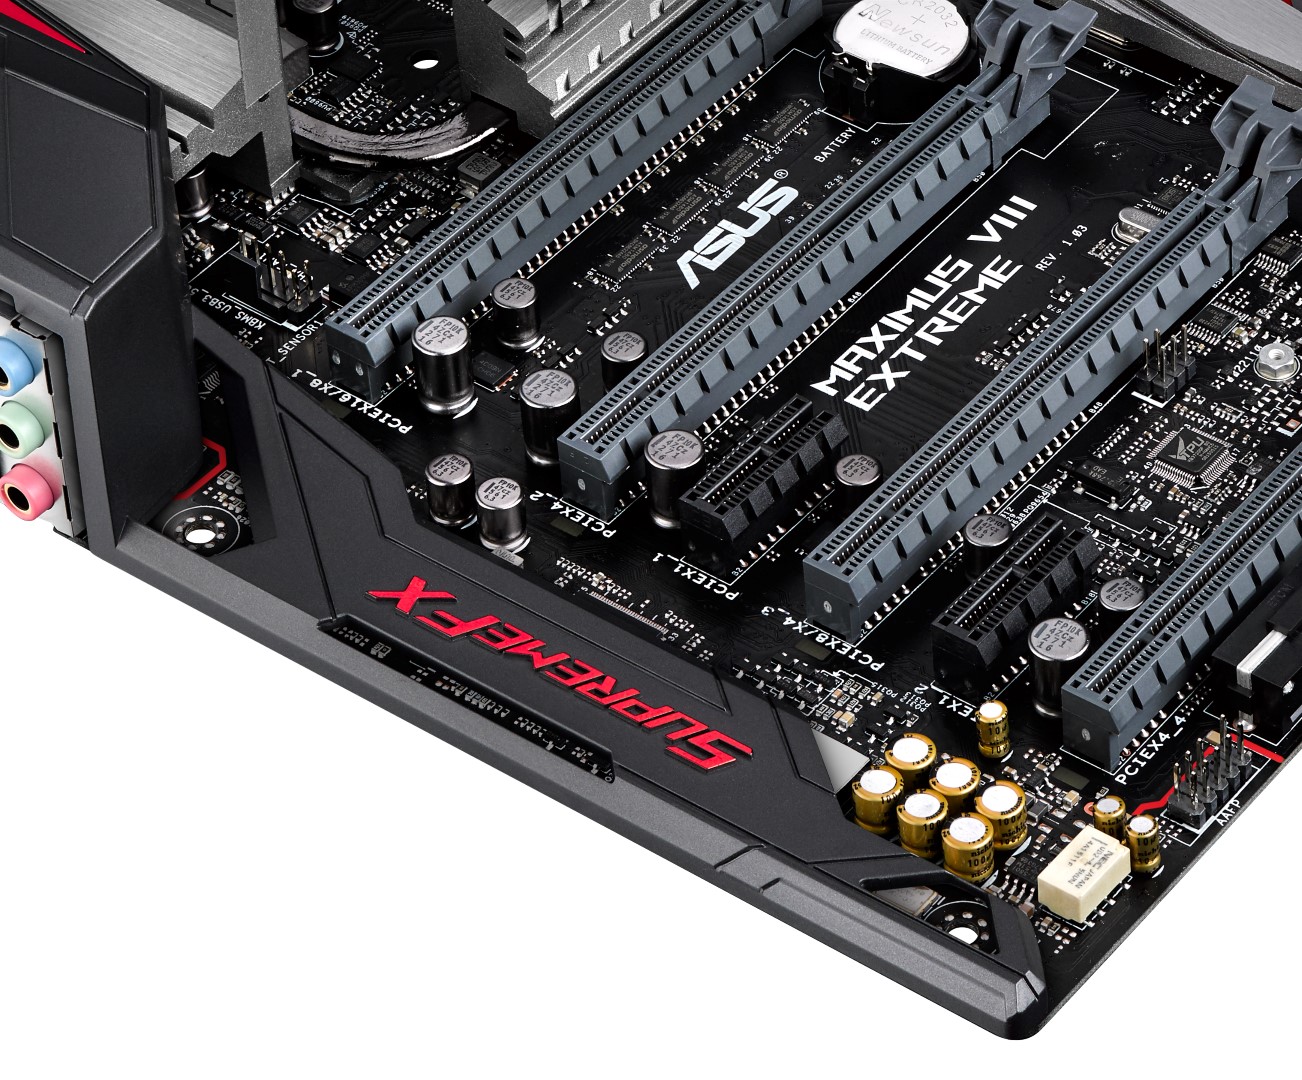 Asus Announces The Z Based Maximus Viii Extreme Rog Motherboard